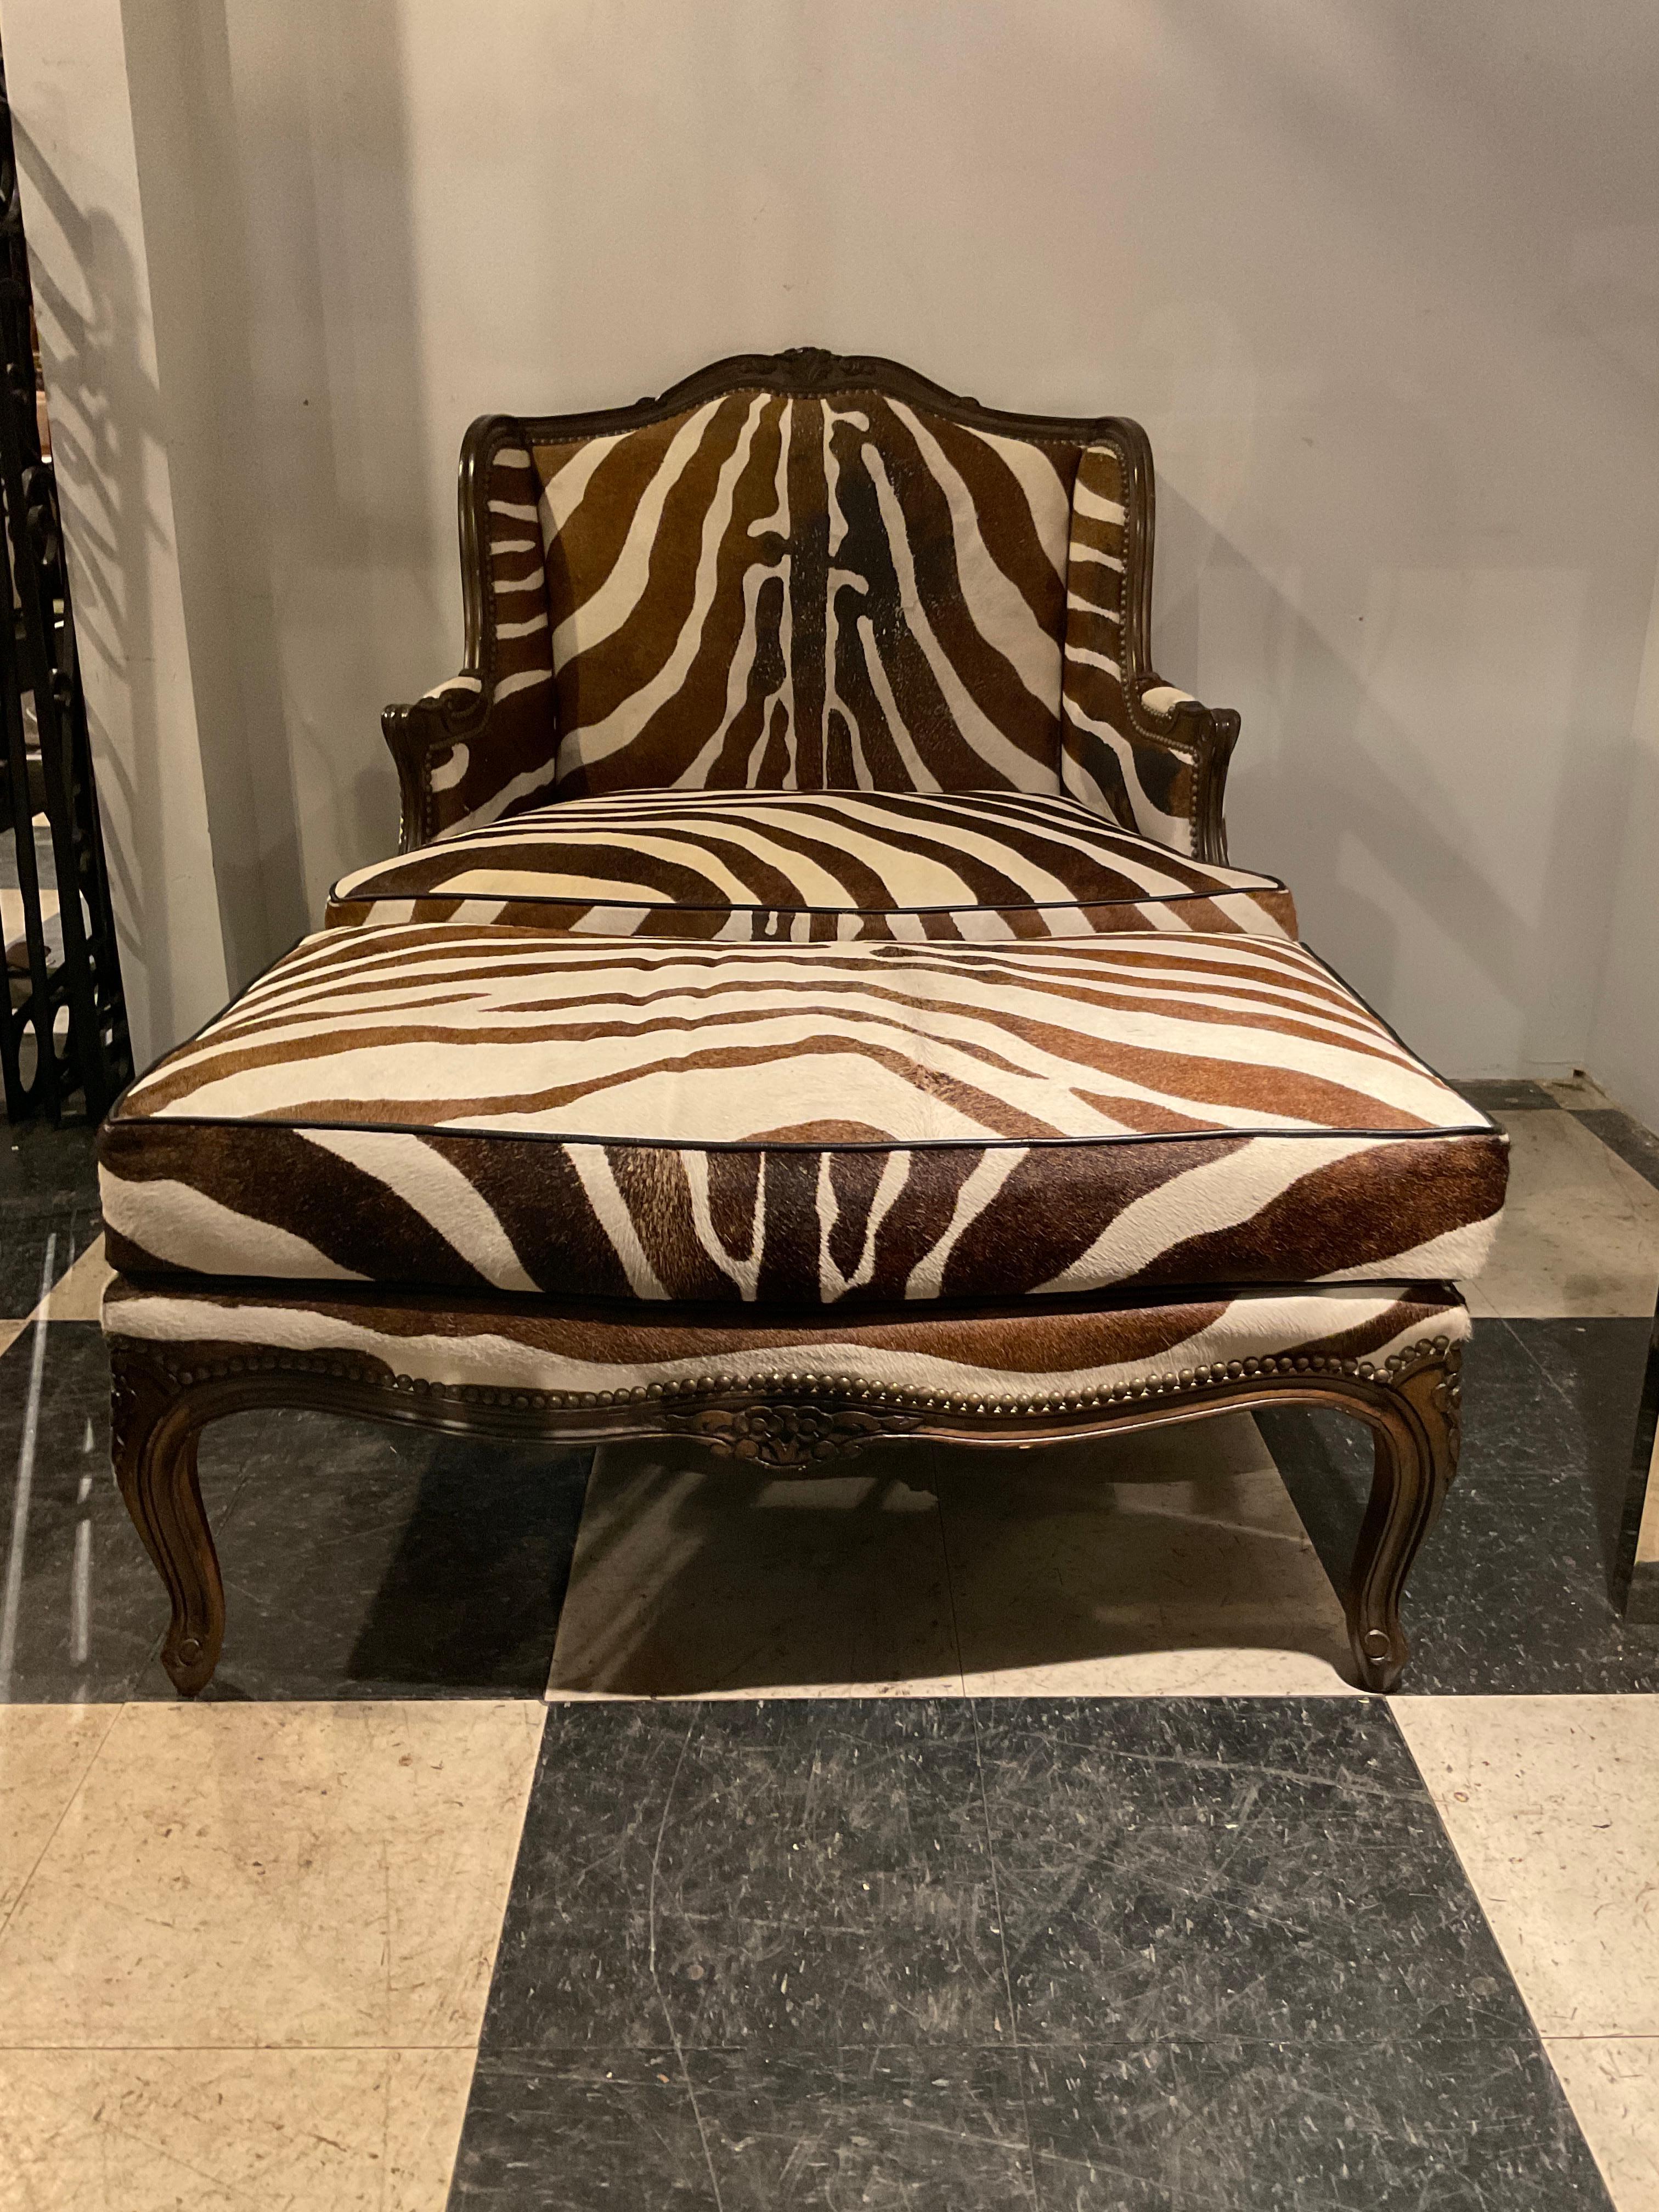 1960s Oversized Bergere And Ottoman Upholstered In Zebra Pattern Cowhide In Good Condition For Sale In Tarrytown, NY